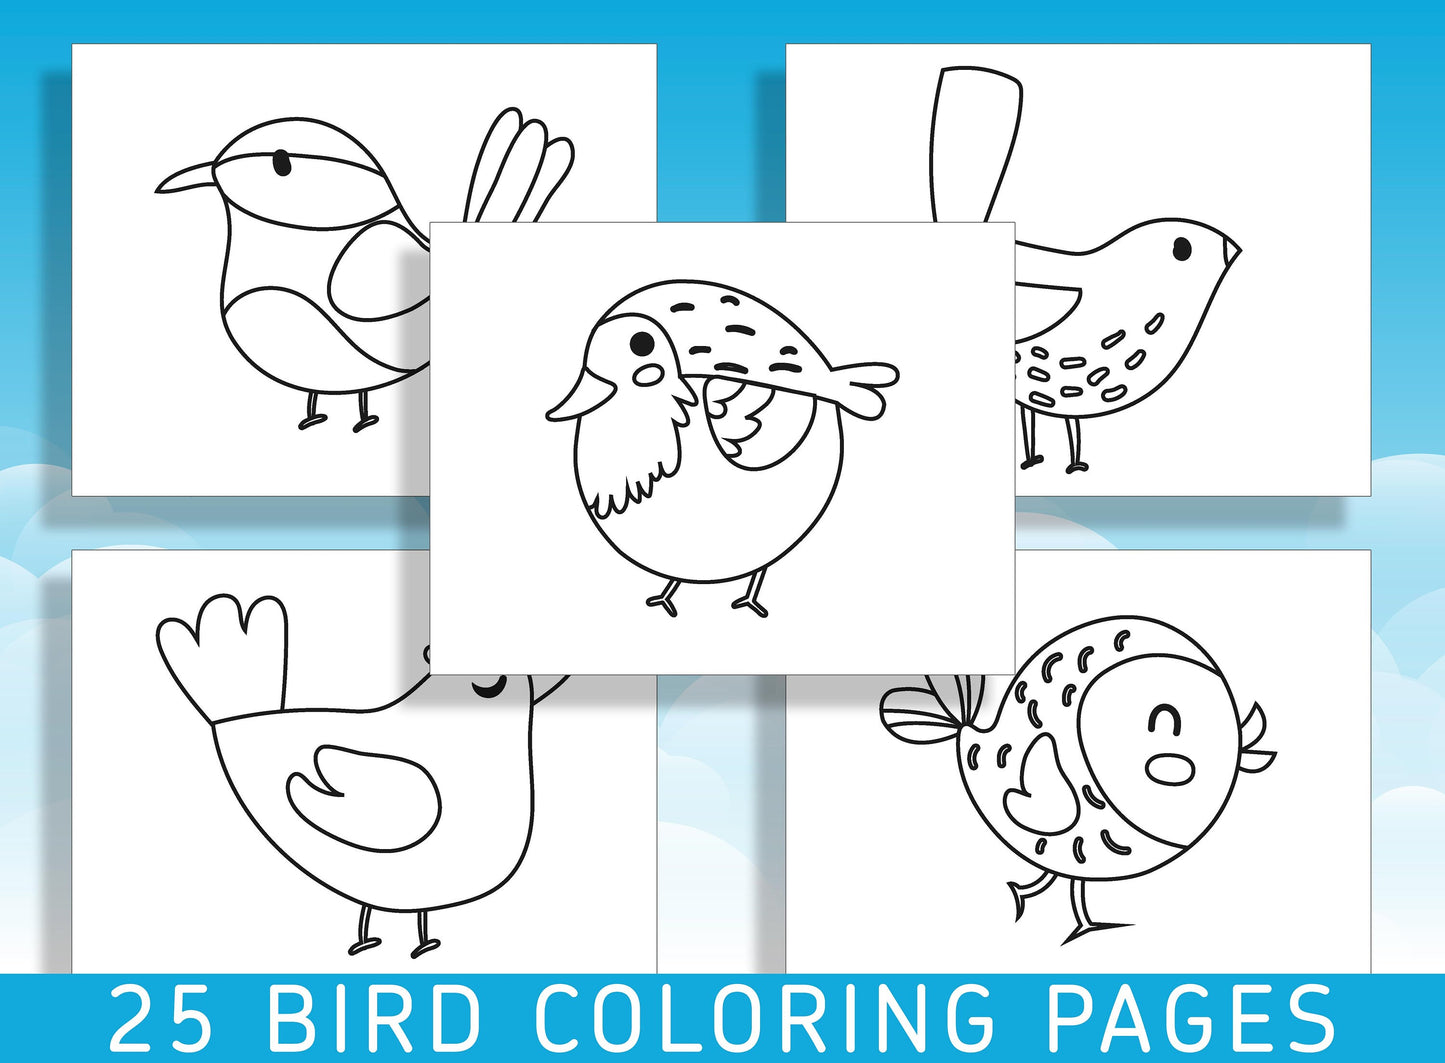 Fun and Easy Bird Coloring Pages for Kindergarten and Preschool: 25 Delightful Designs to Spark Creativity - PDF File, Instant Download